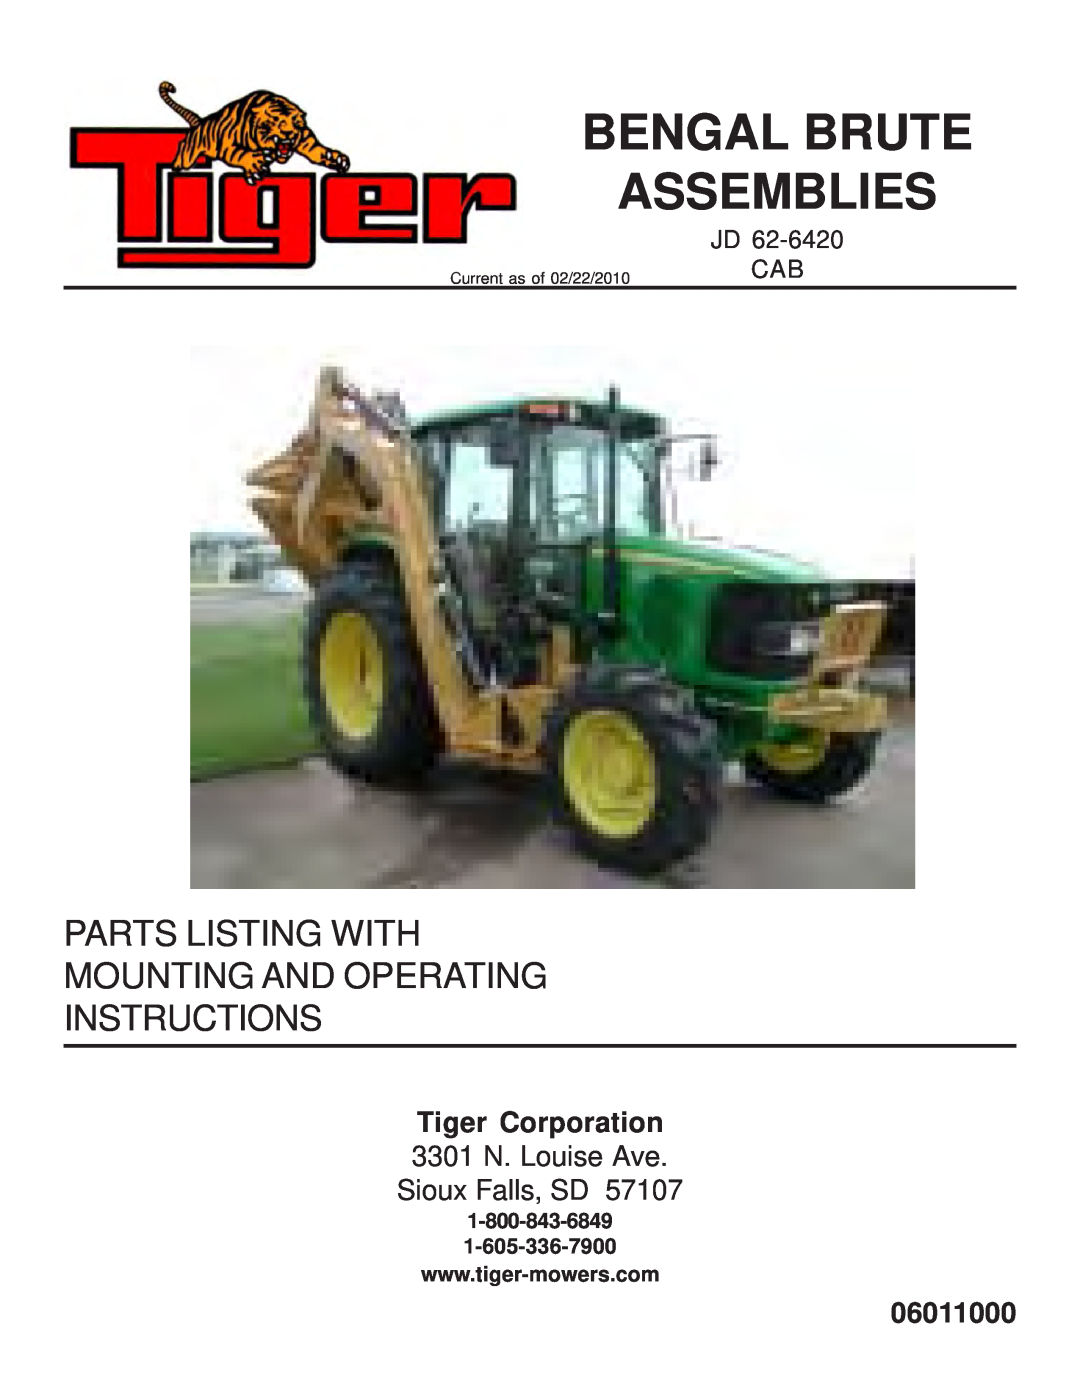 Tiger JD 62-6420 manual Tiger Corporation, 3301 N. Louise Ave Sioux Falls, SD, 06011000, Jd Cab, Bengal Brute Assemblies 